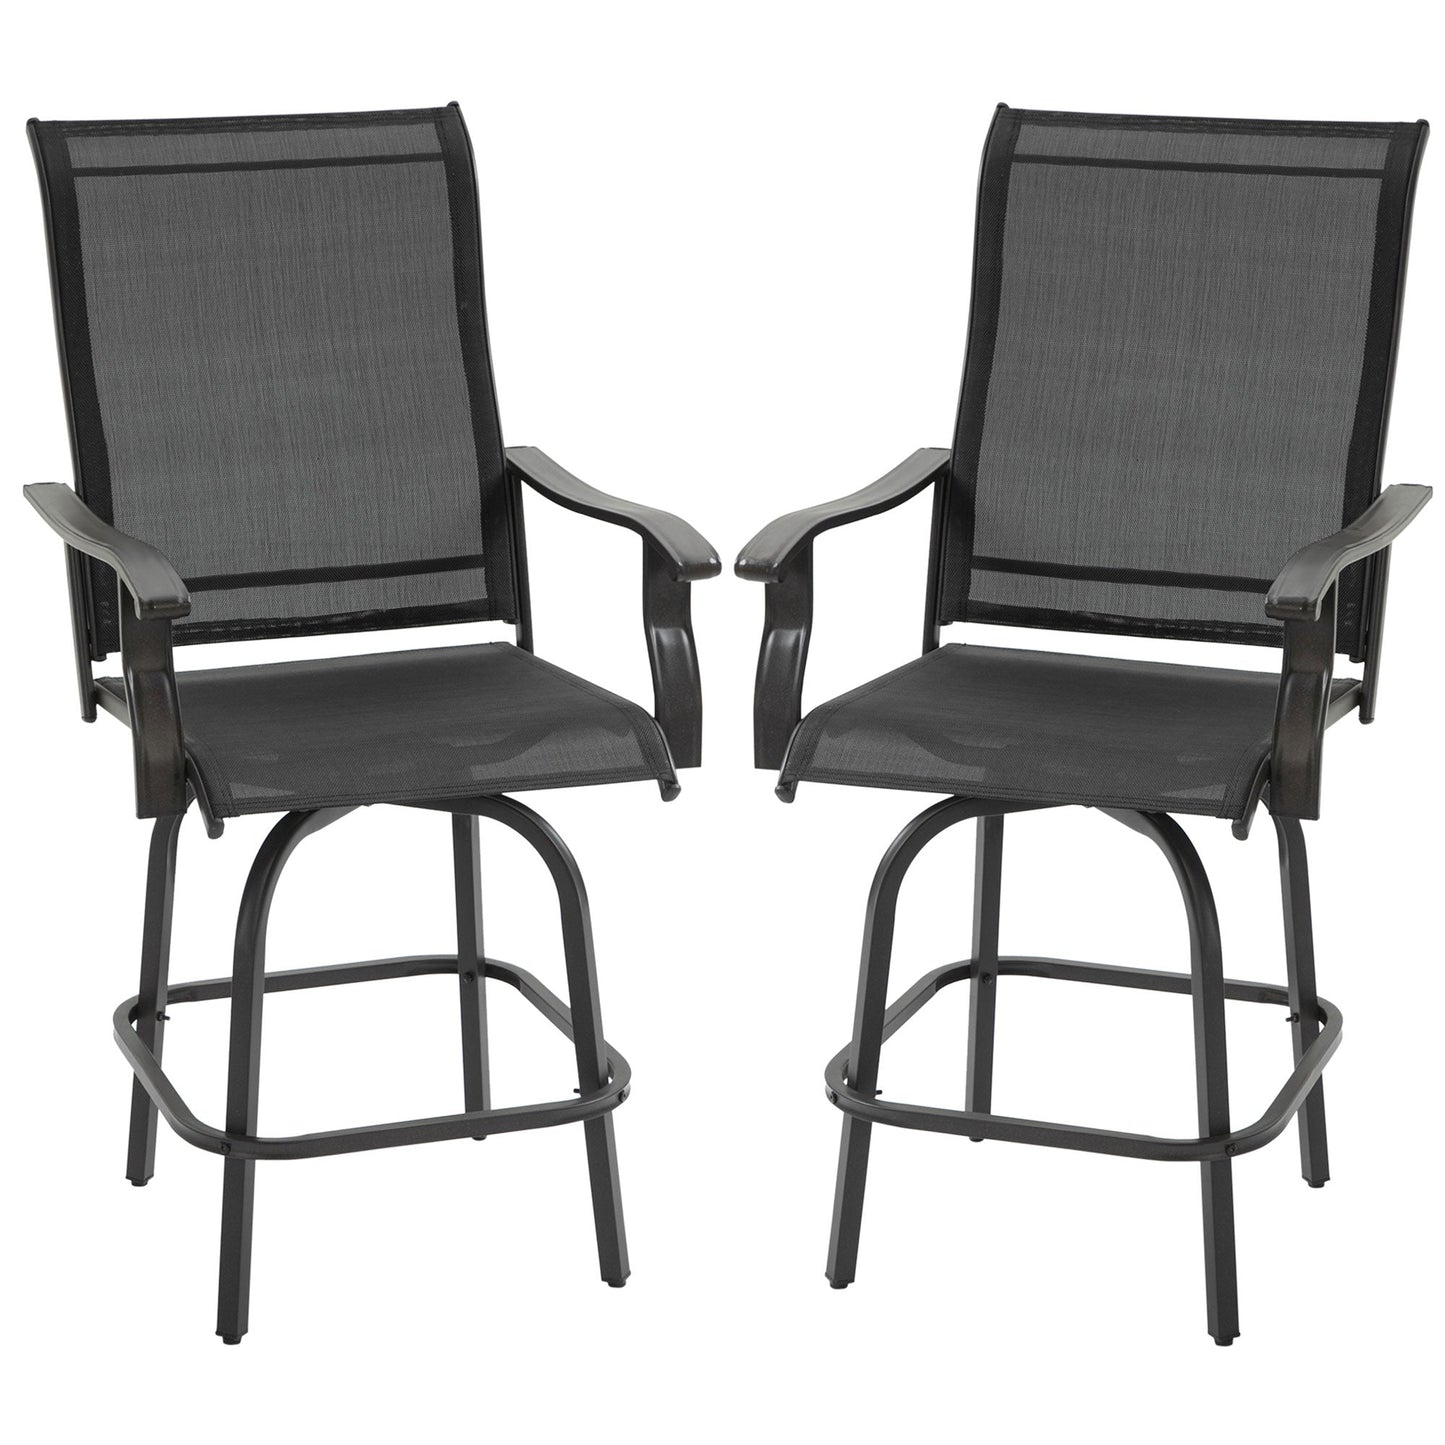 -Outsunny Set of 2 Outdoor Swivel Bar Stools with Armrests, Bar Height Patio Chairs with Steel Frame for Balcony, Poolside, Backyard, Black - Outdoor Style Company